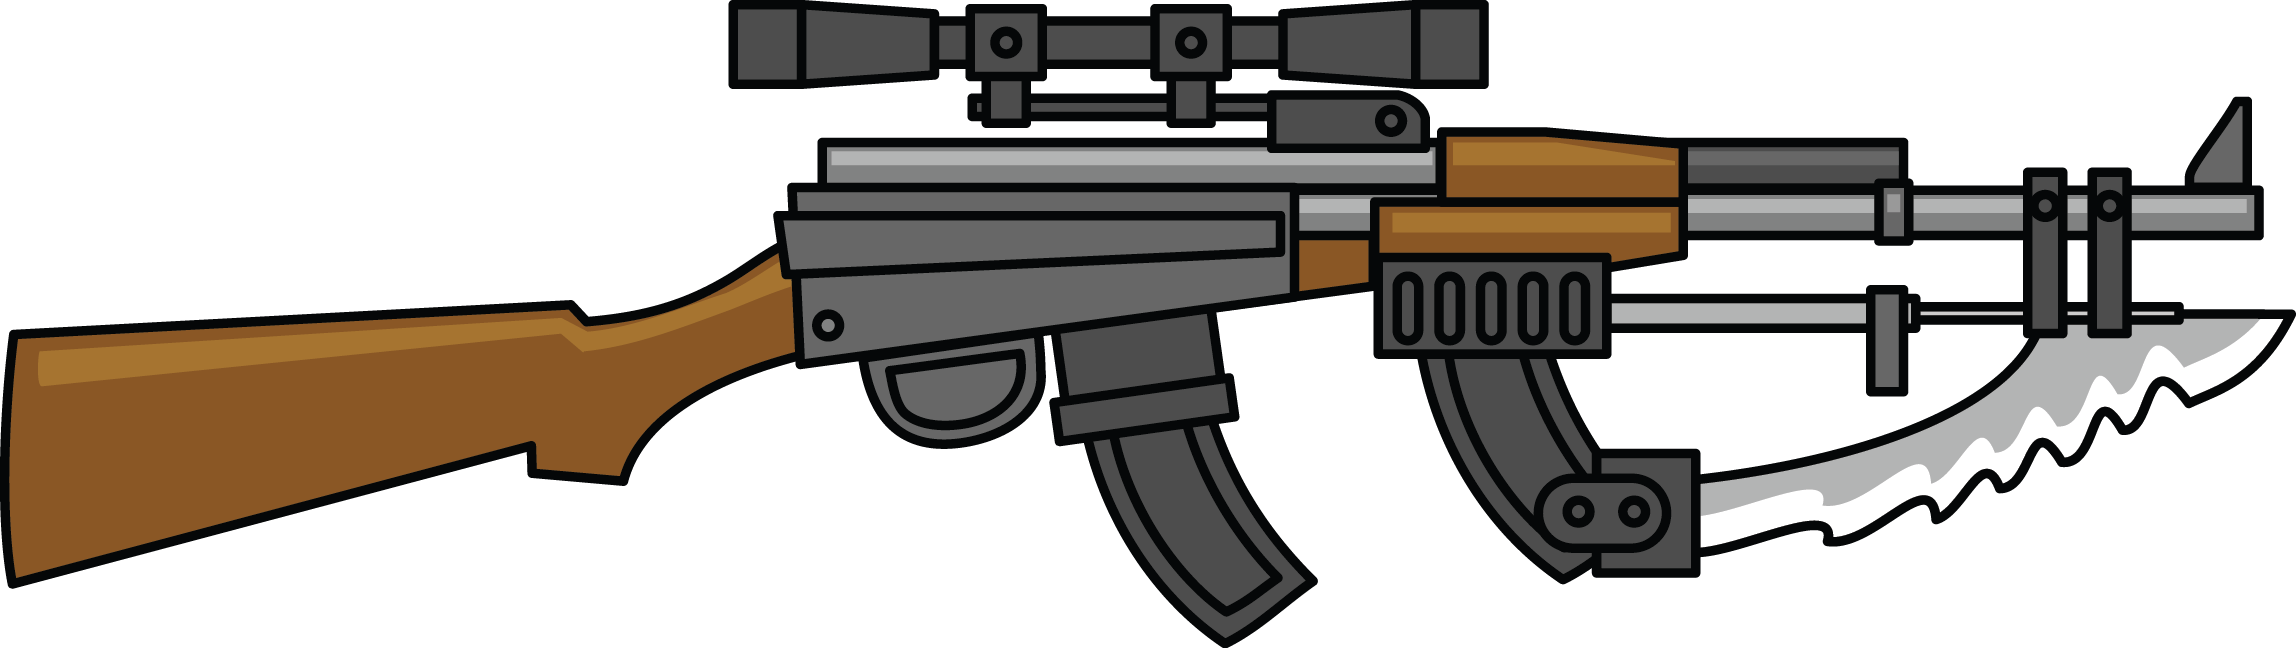 Assault Rifle With Bayonet Attachment PNG